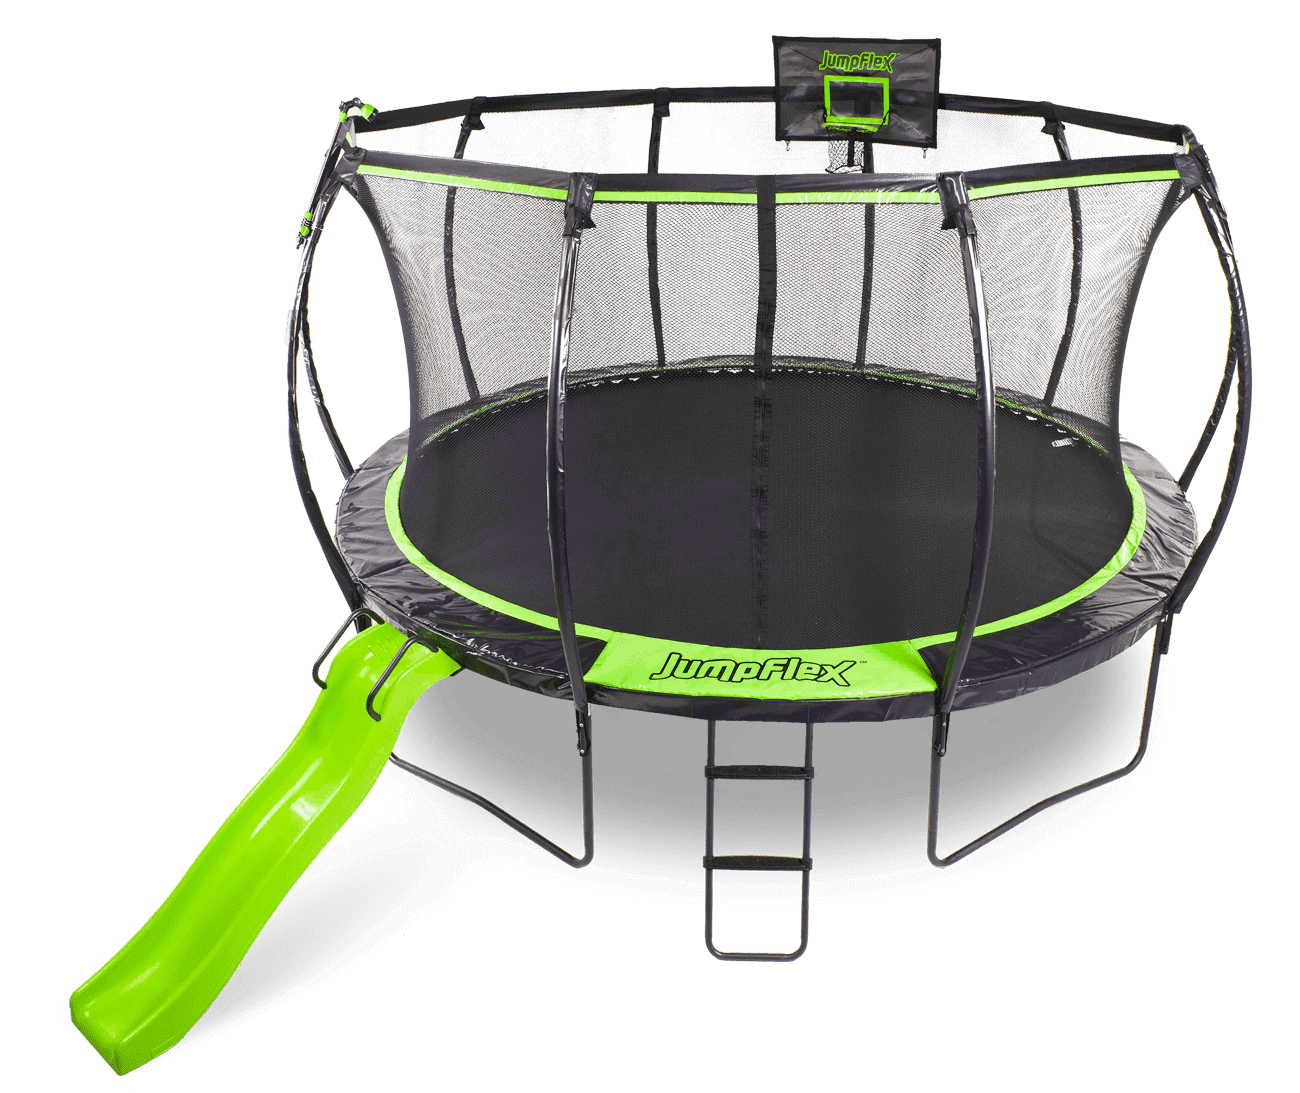 Safety features of a Jumpflex trampoline